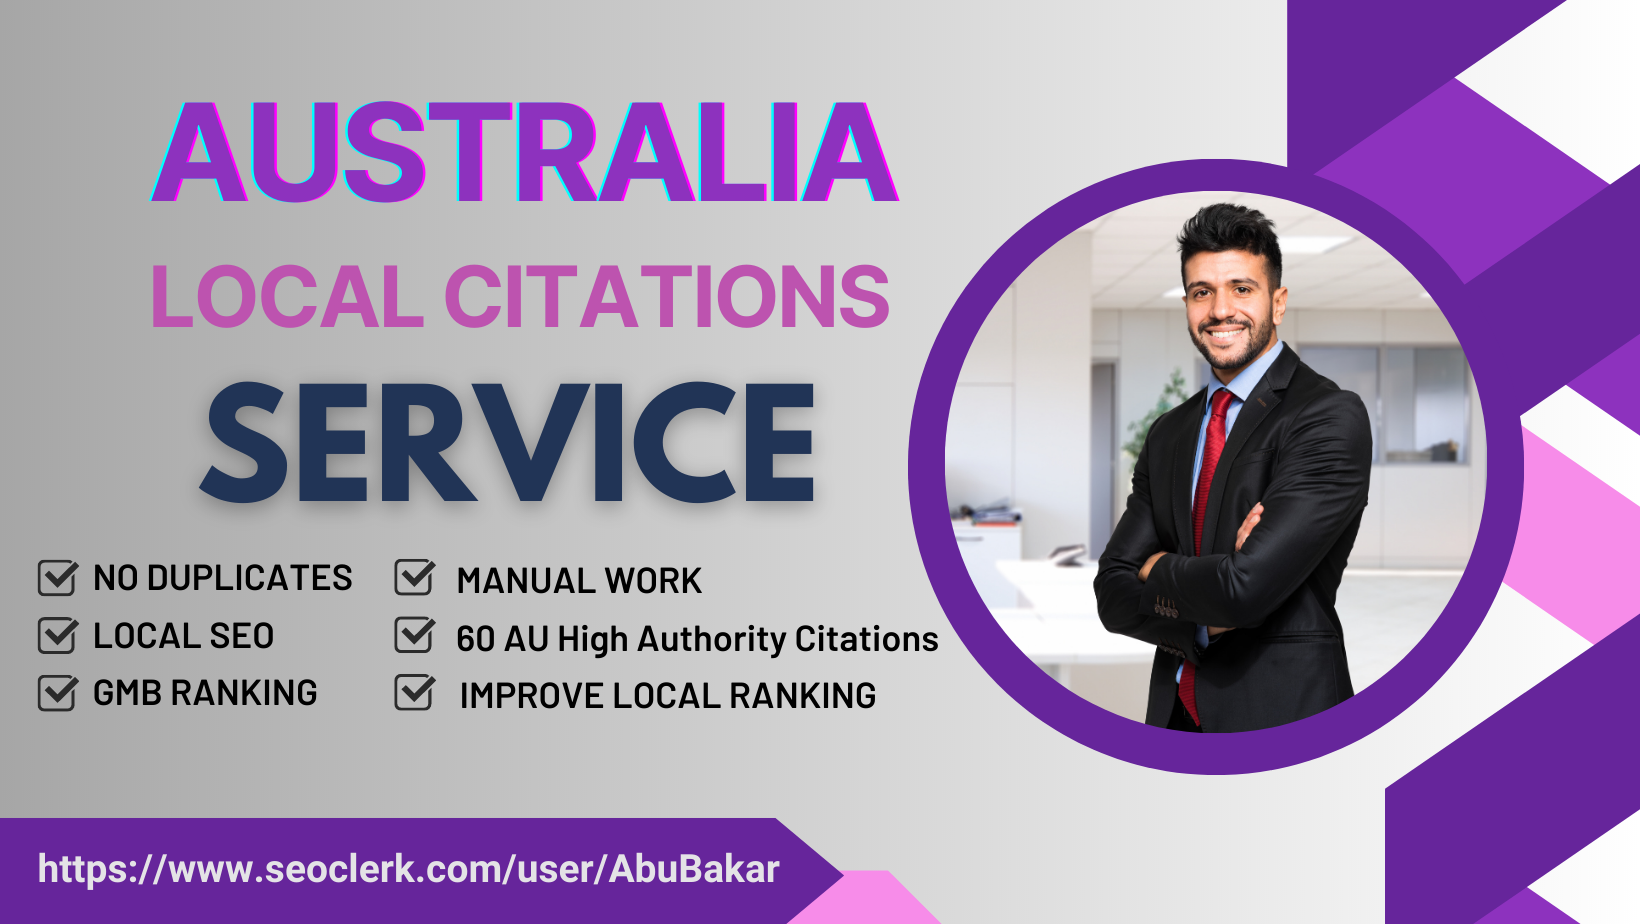 I will create 60 high Authority Australian Business Listings for local SEO